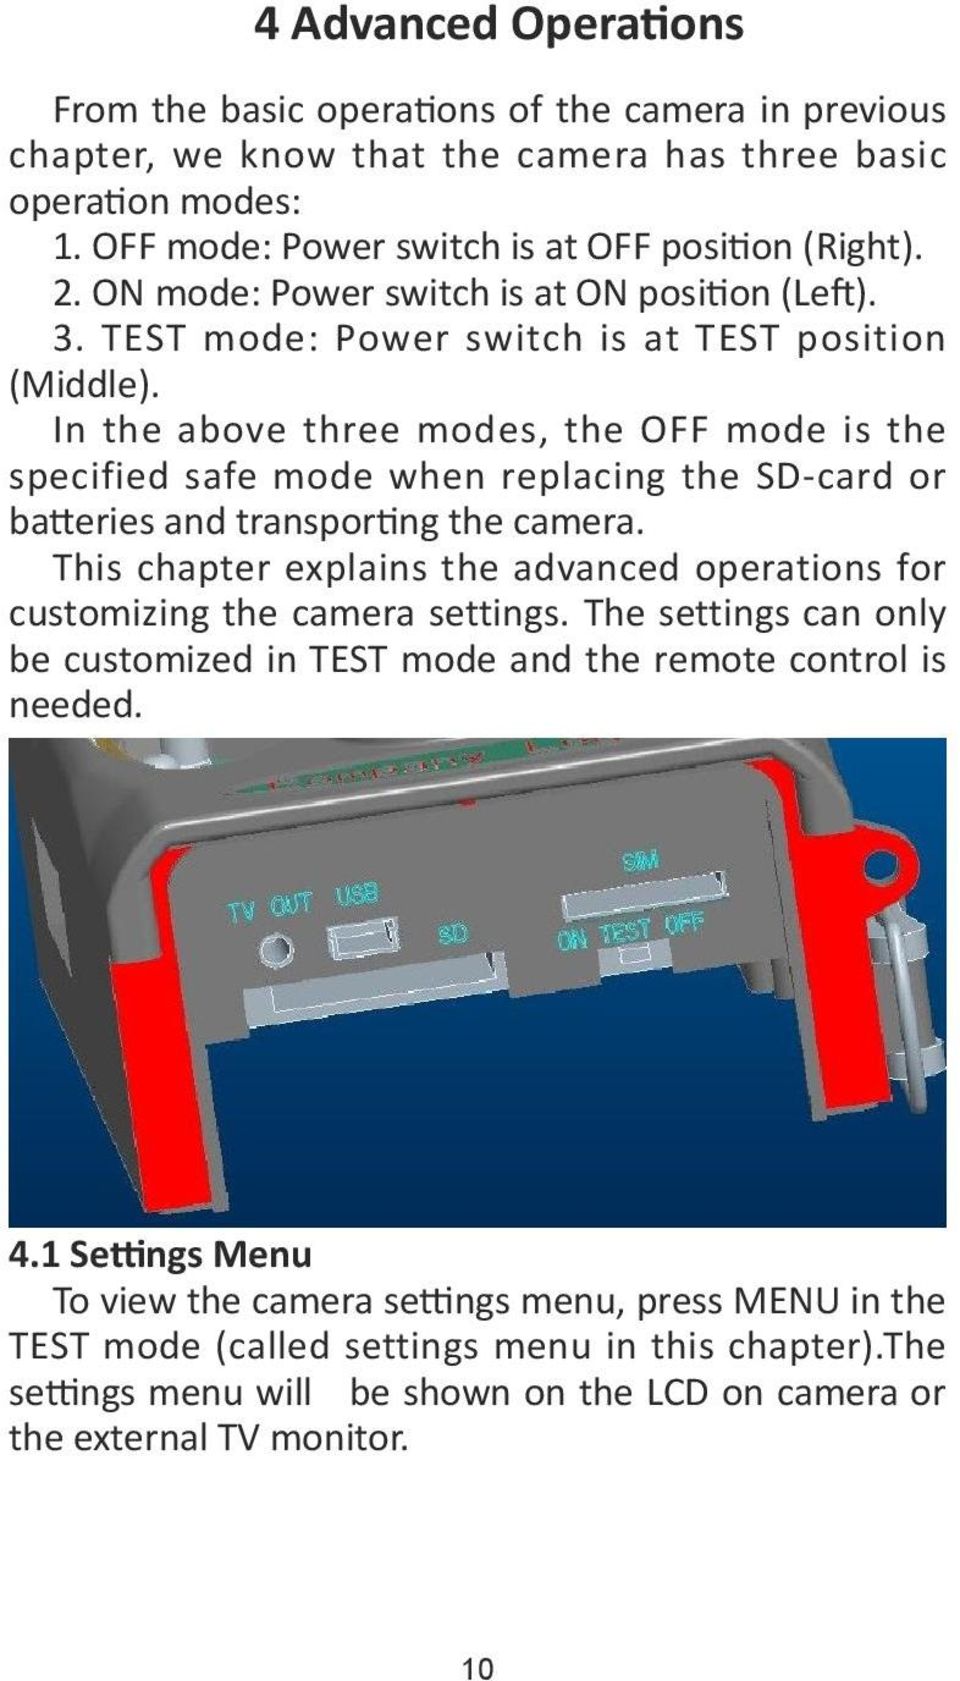 In the above three modes, the OFF mode is the specified safe mode when replacing the SD-card or batteries and transporting the camera.